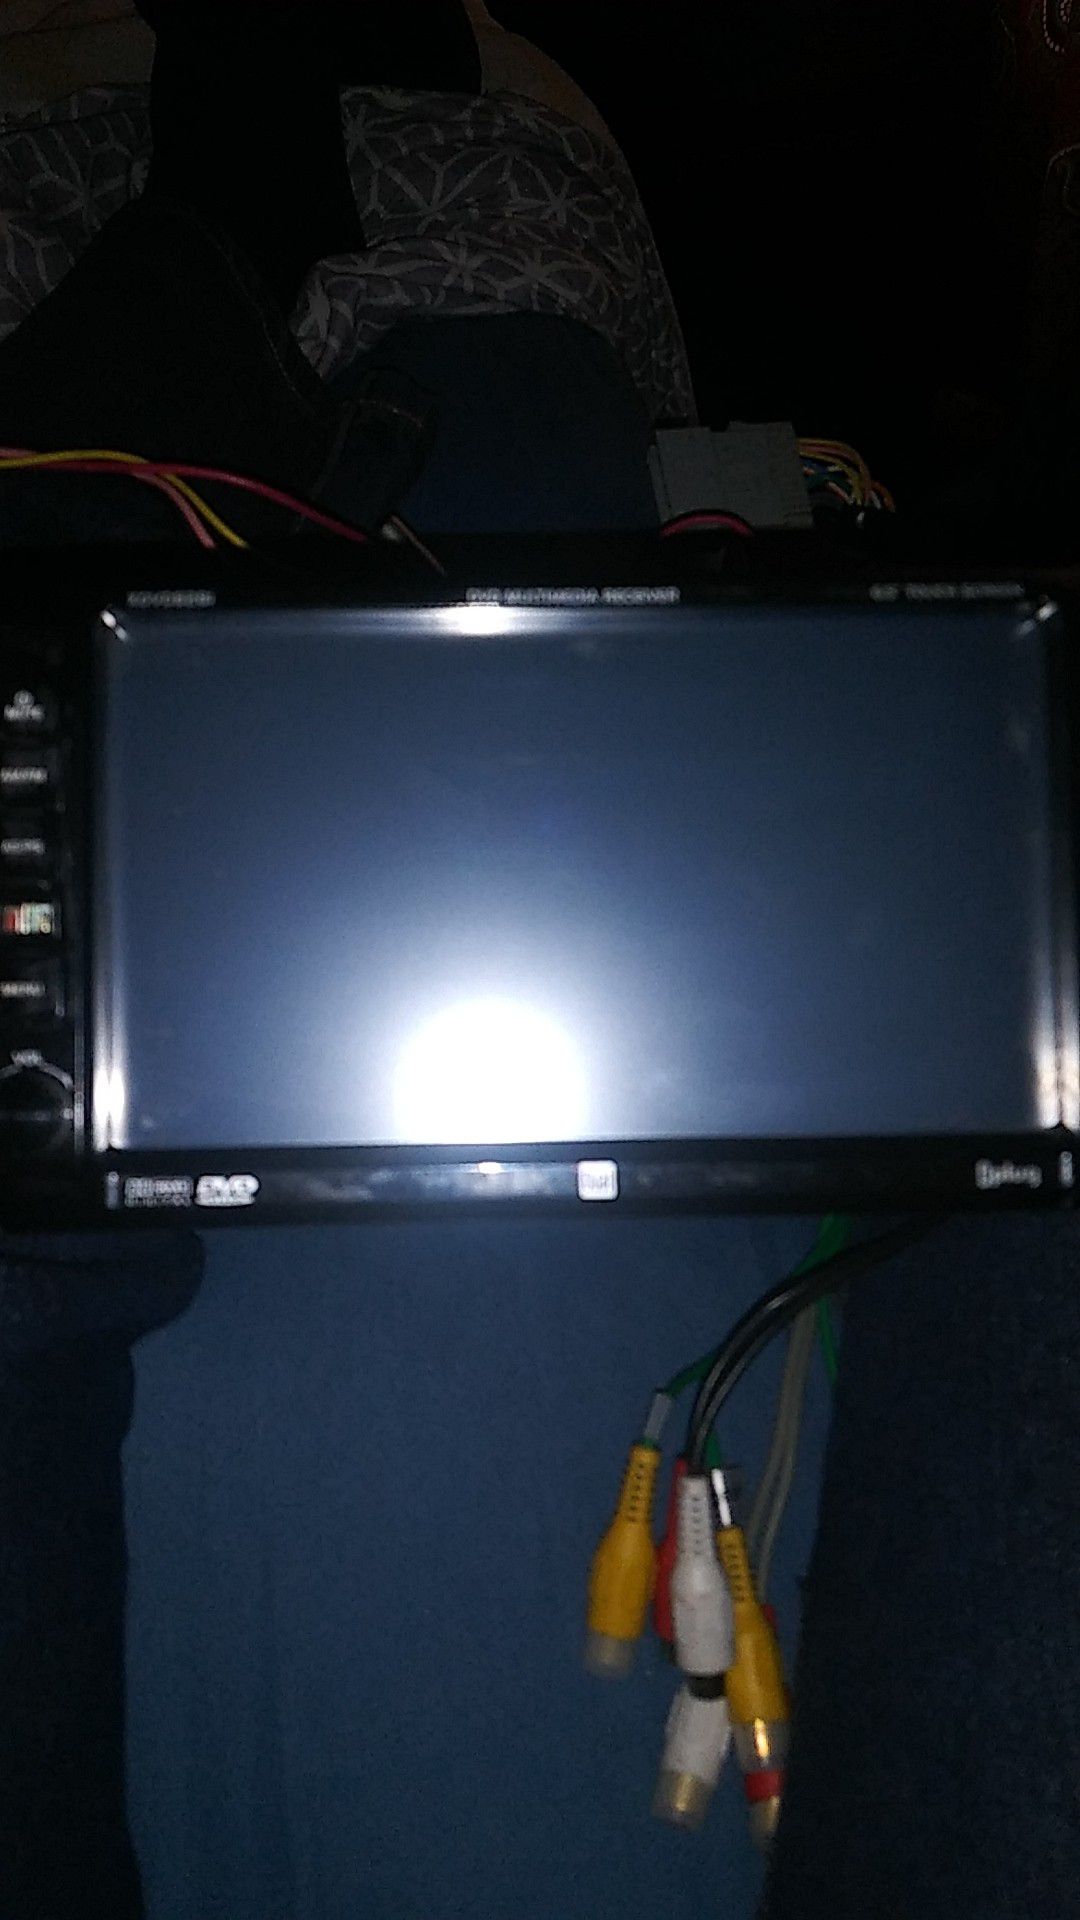 Dual tv,dvd,car stereo system for a car